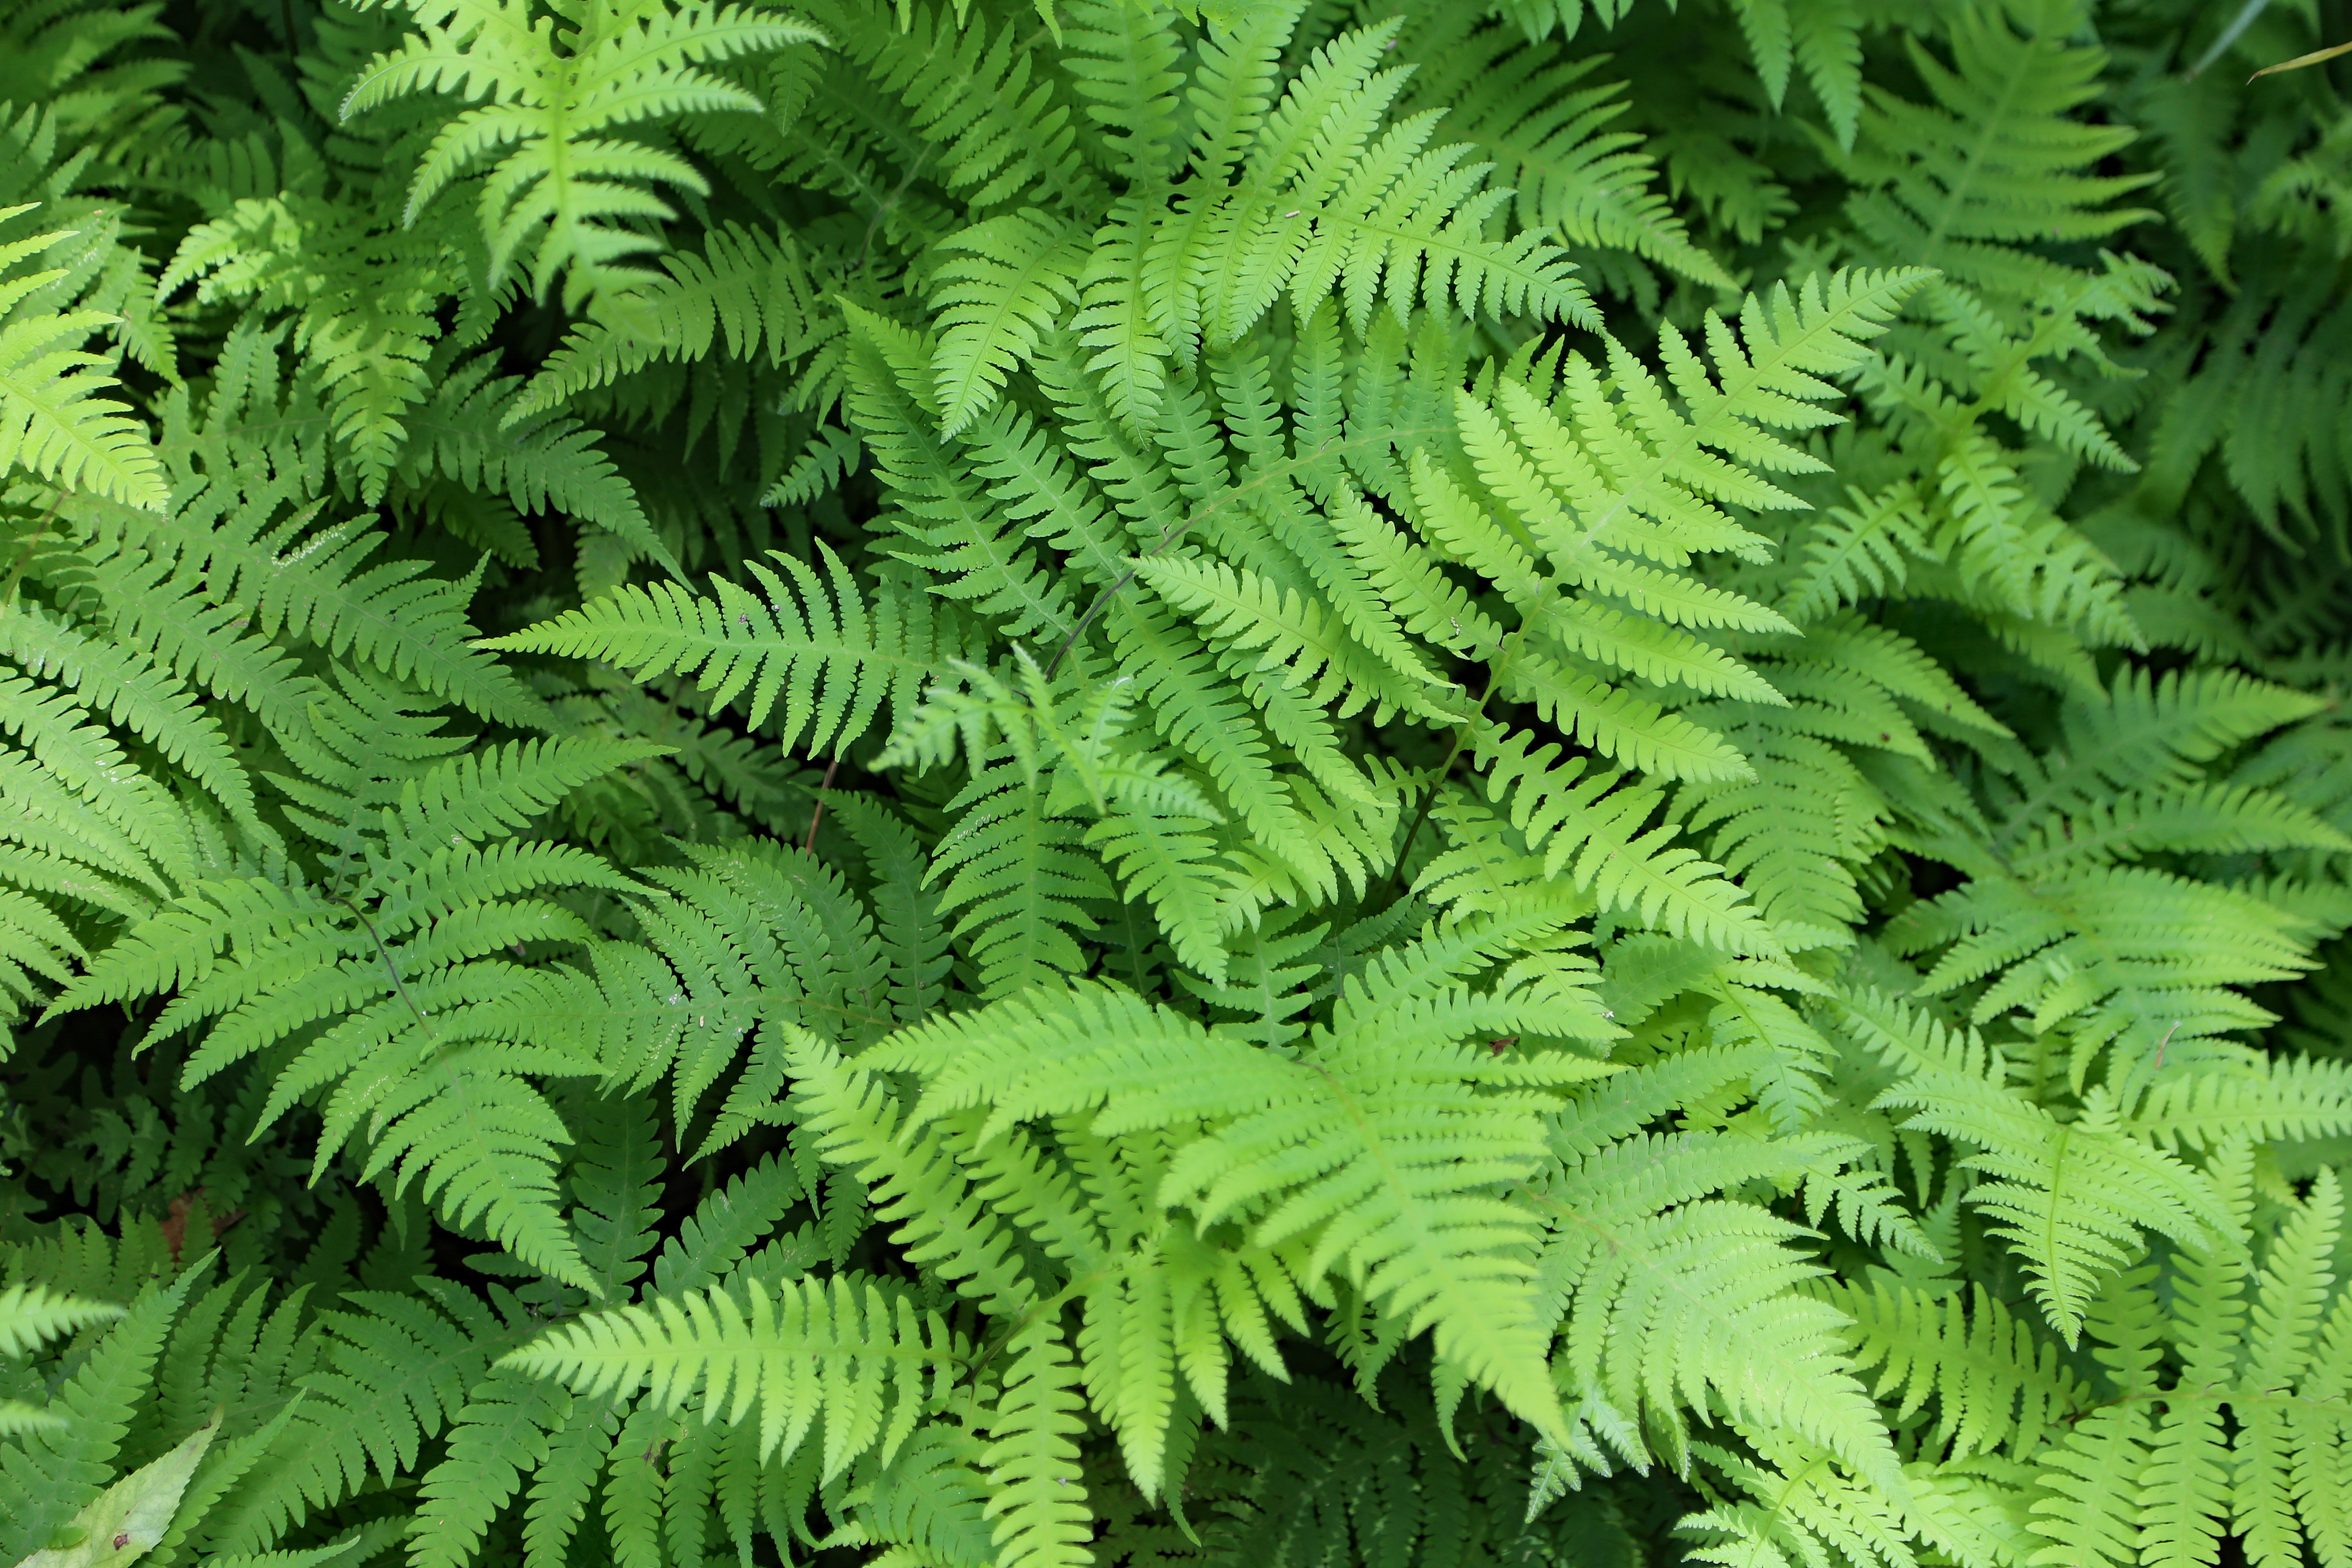 The Scientific Name is Phegopteris hexagonoptera. You will likely hear them called Broad Beech Fern. This picture shows the A colony of Broad Beech Fern, a 